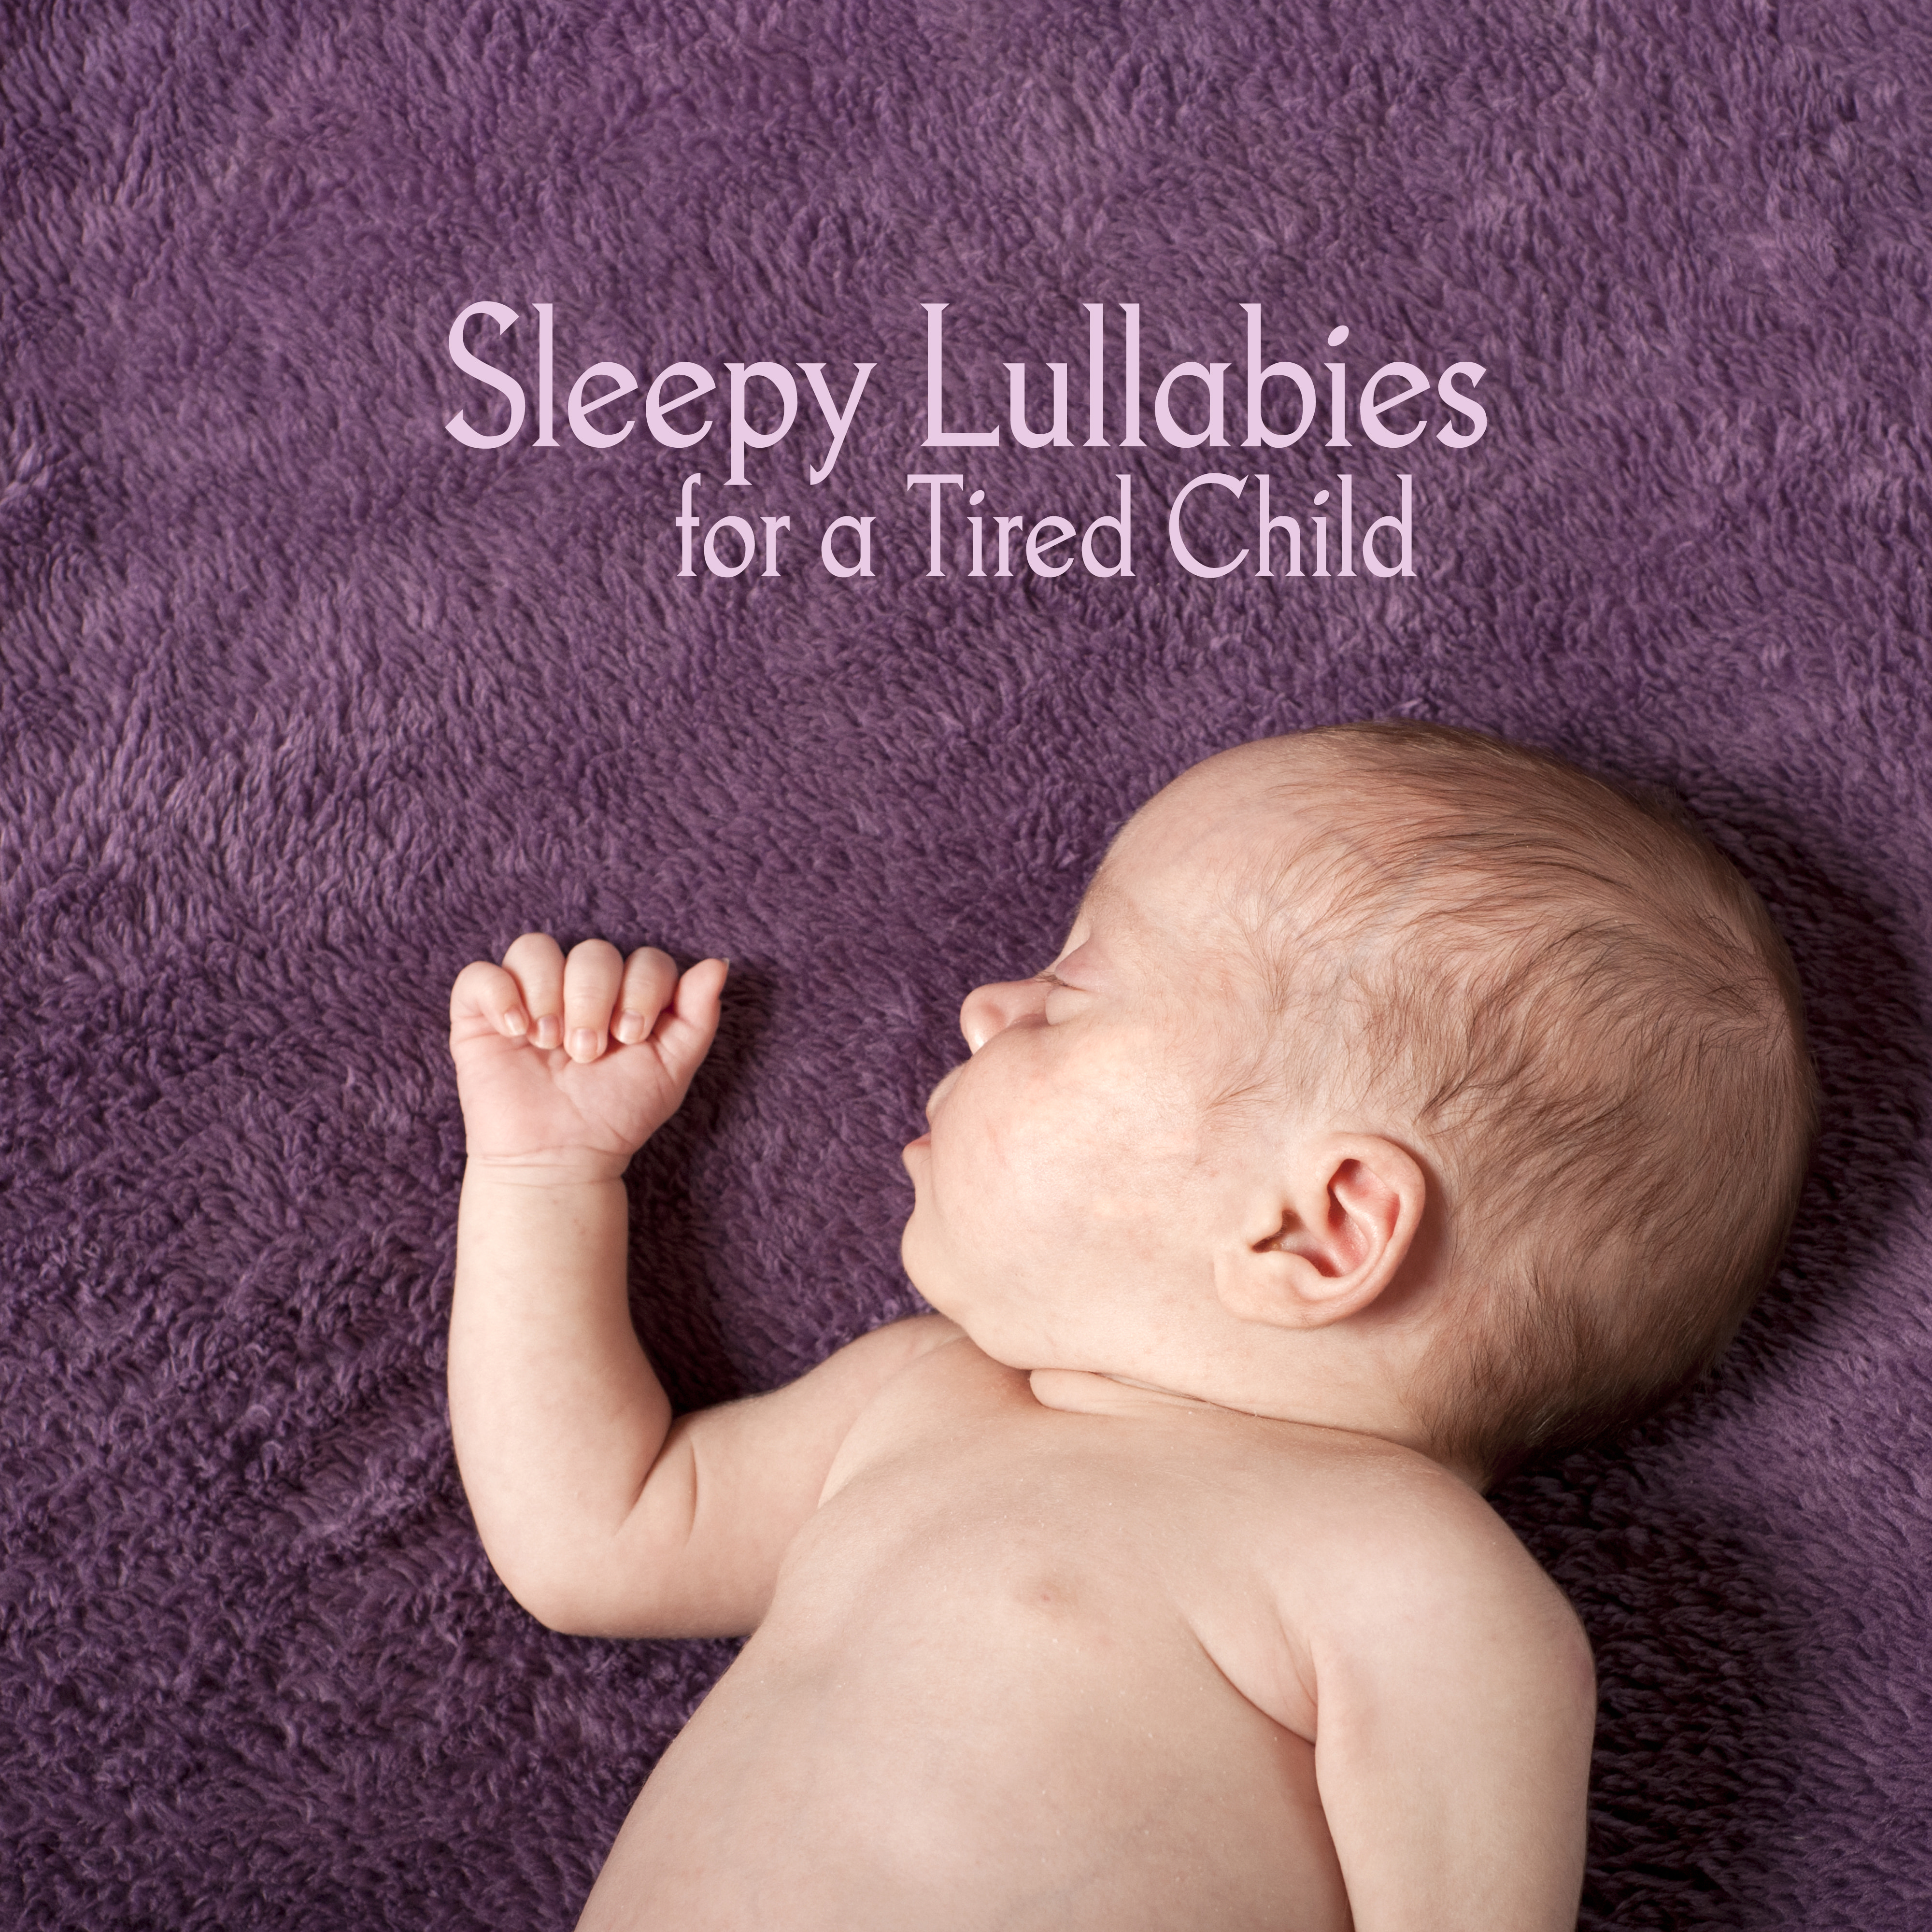 Sleepy Lullabies for a Tired Child